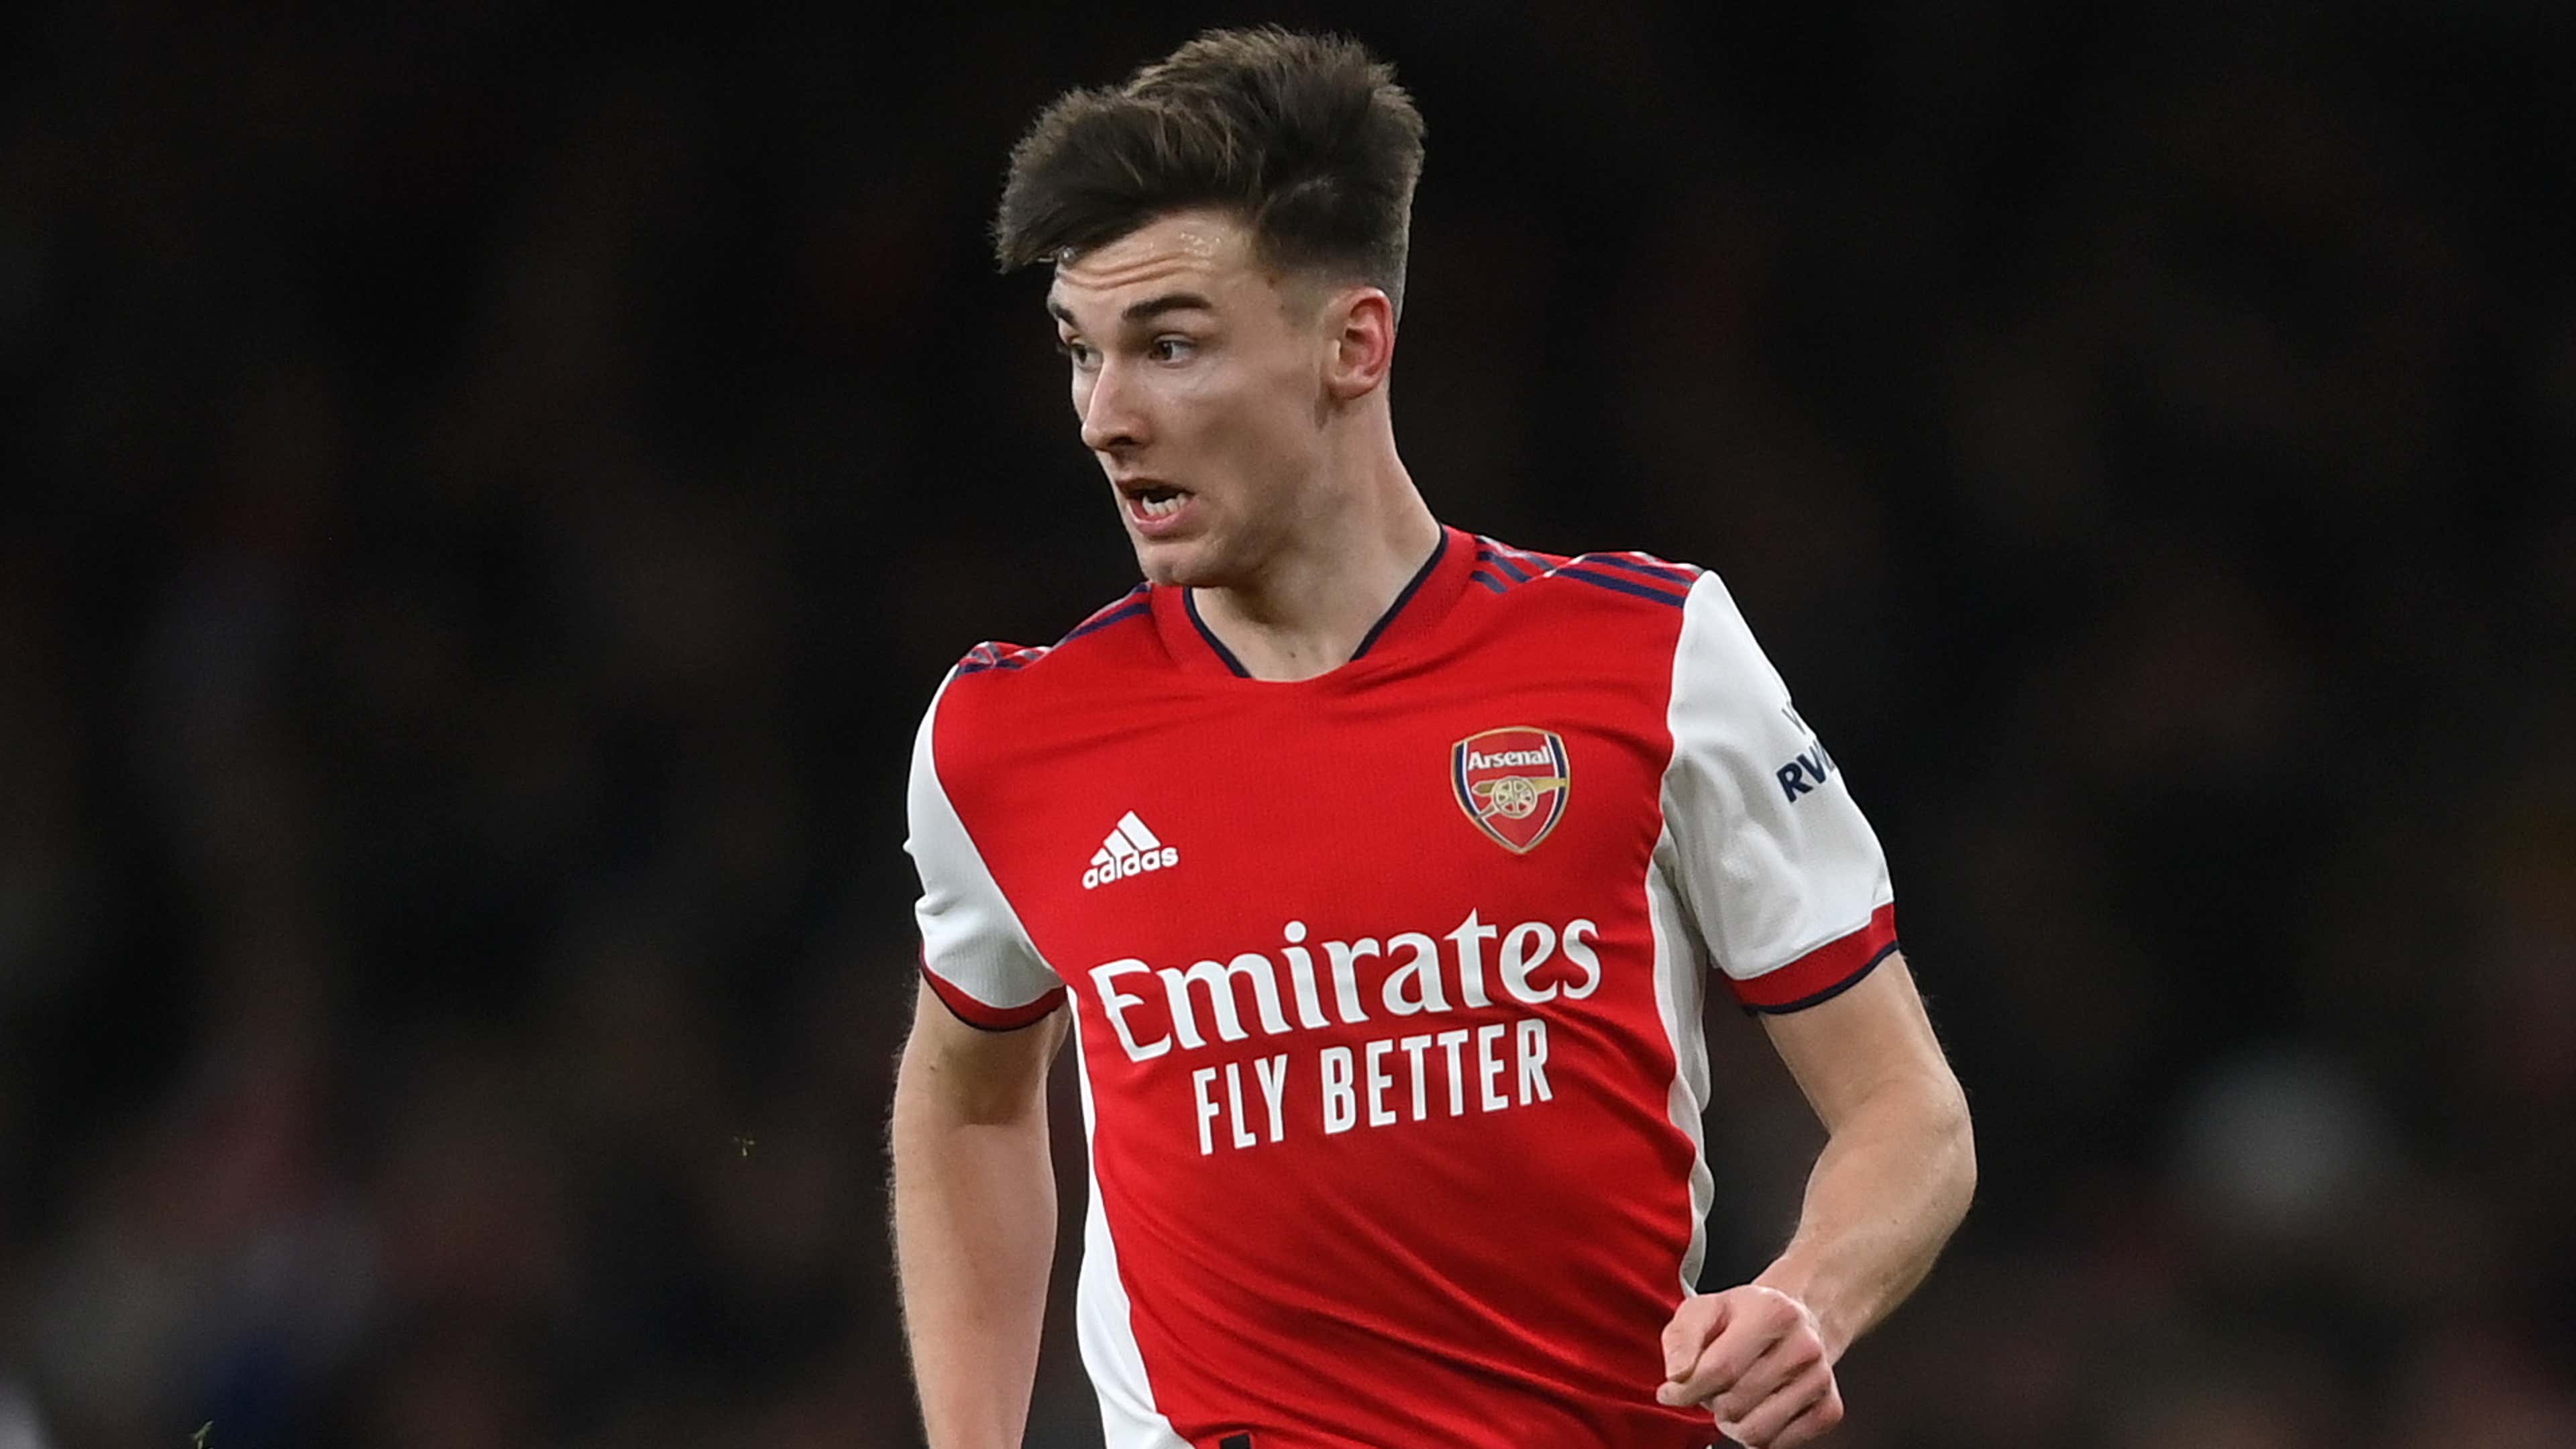 Arsenal defender Kieran Tierney 'likely' to miss rest of the season with knee injury & World Cup play-off concern for Scotland | Goal.com